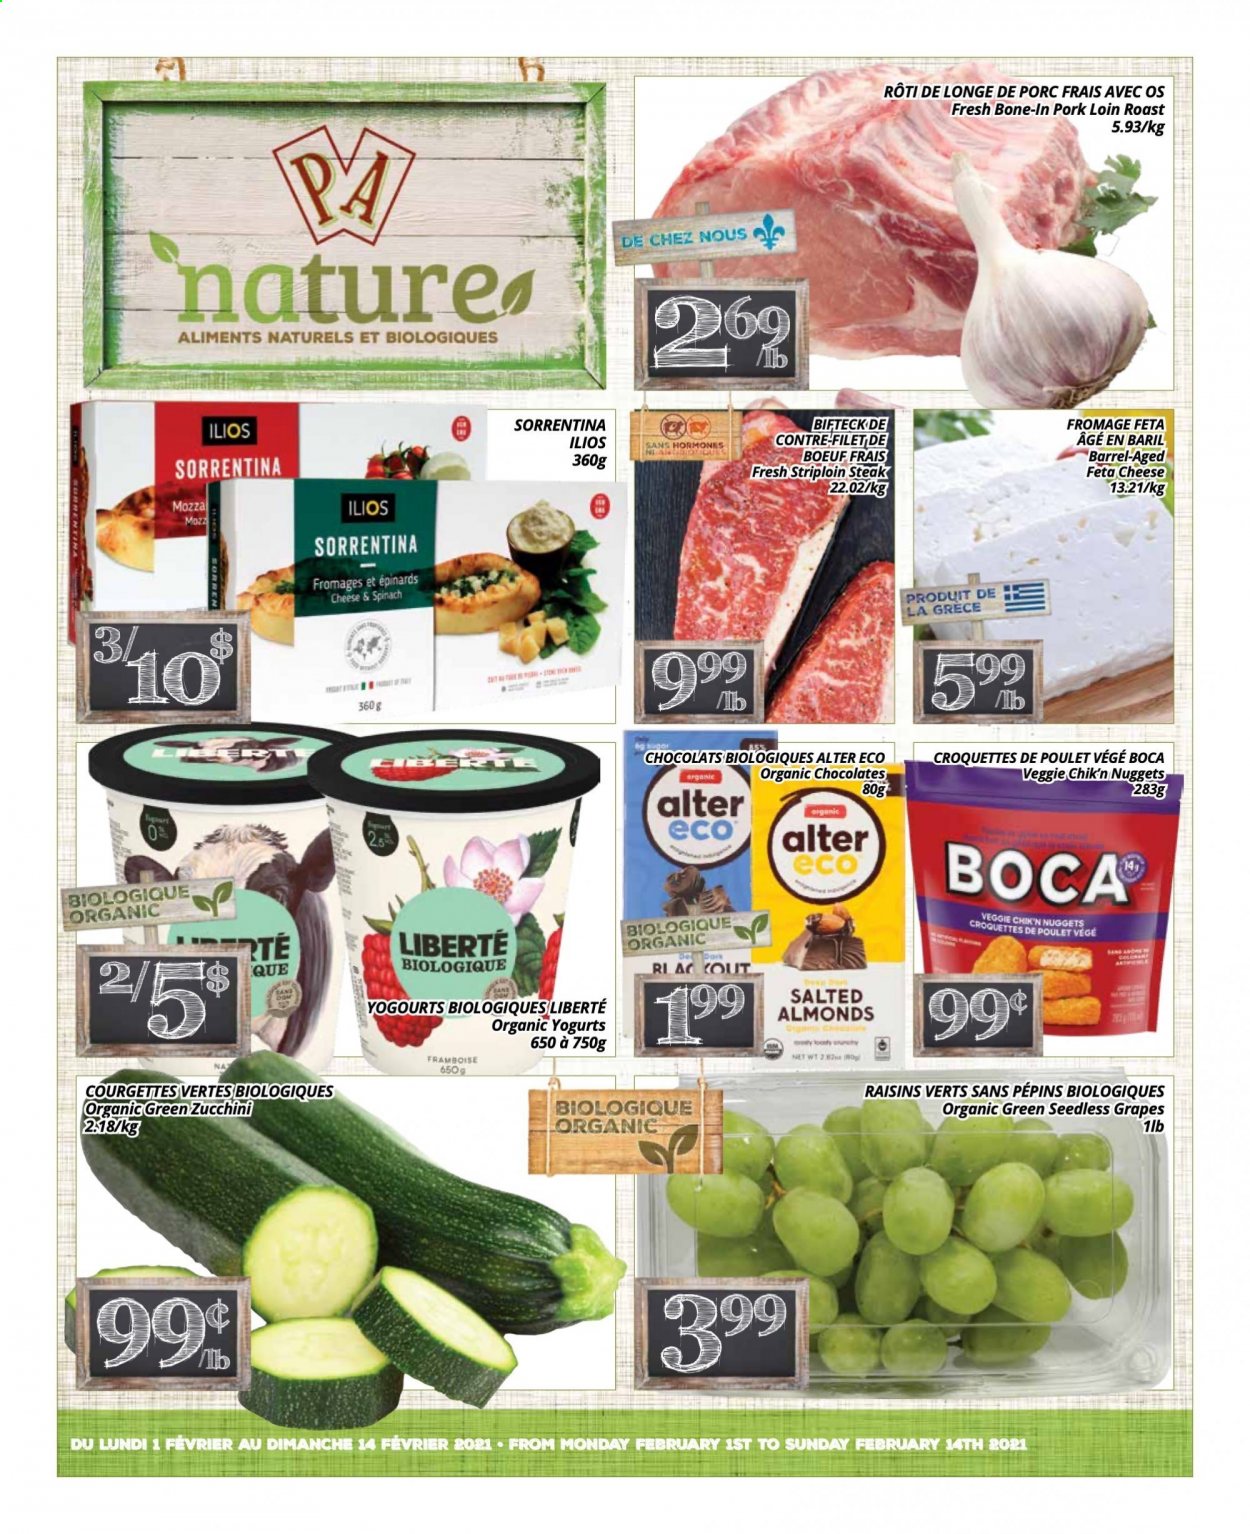 thumbnail - PA Nature Flyer - February 01, 2021 - February 14, 2021 - Sales products - zucchini, grapes, seedless grapes, nuggets, feta, potato croquettes, chocolate, almonds, dried fruit, beef meat, striploin steak, pork loin, pork meat, raisins, steak. Page 1.